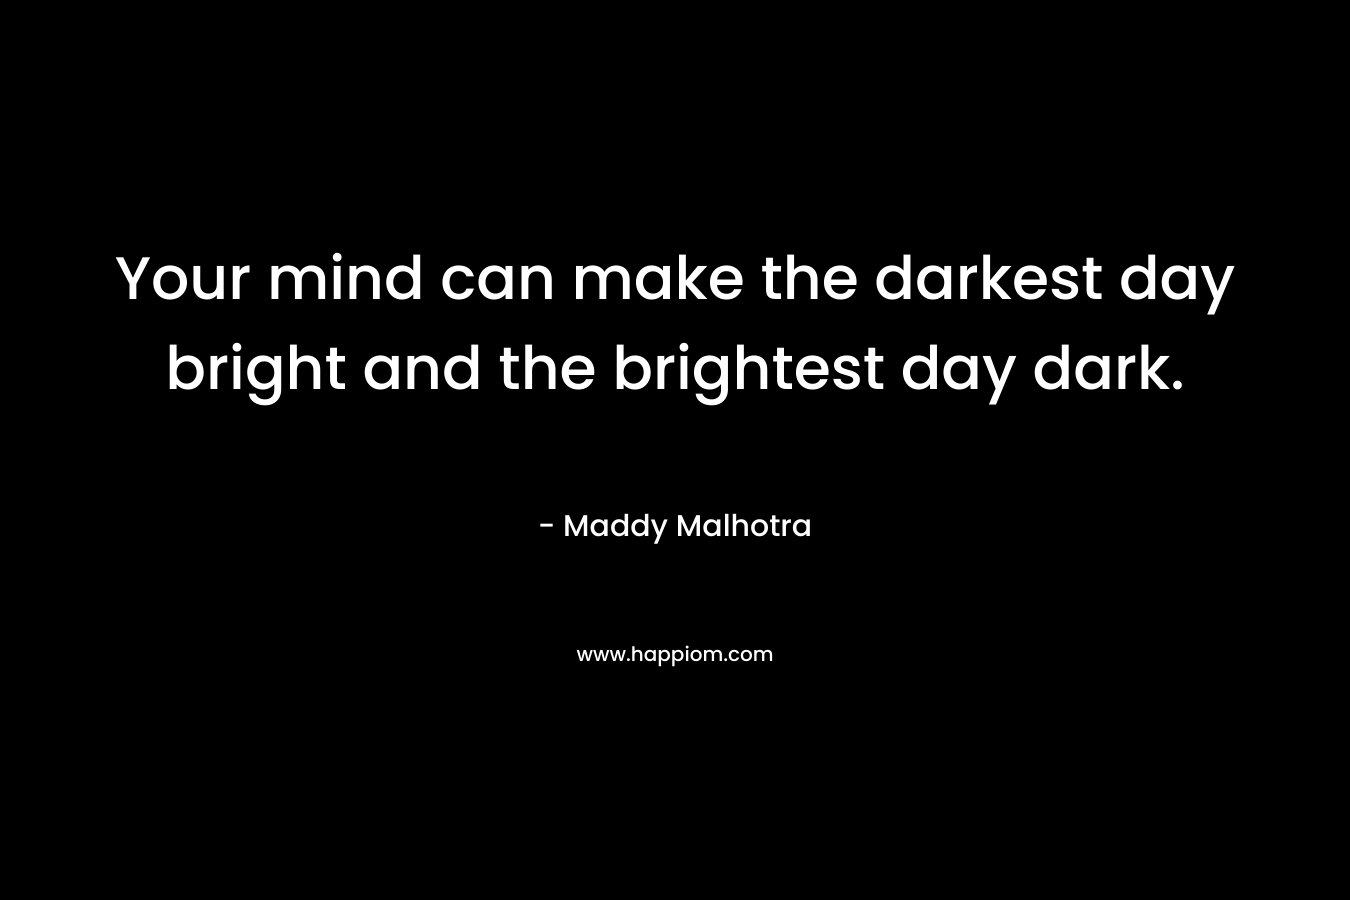 Your mind can make the darkest day bright and the brightest day dark.